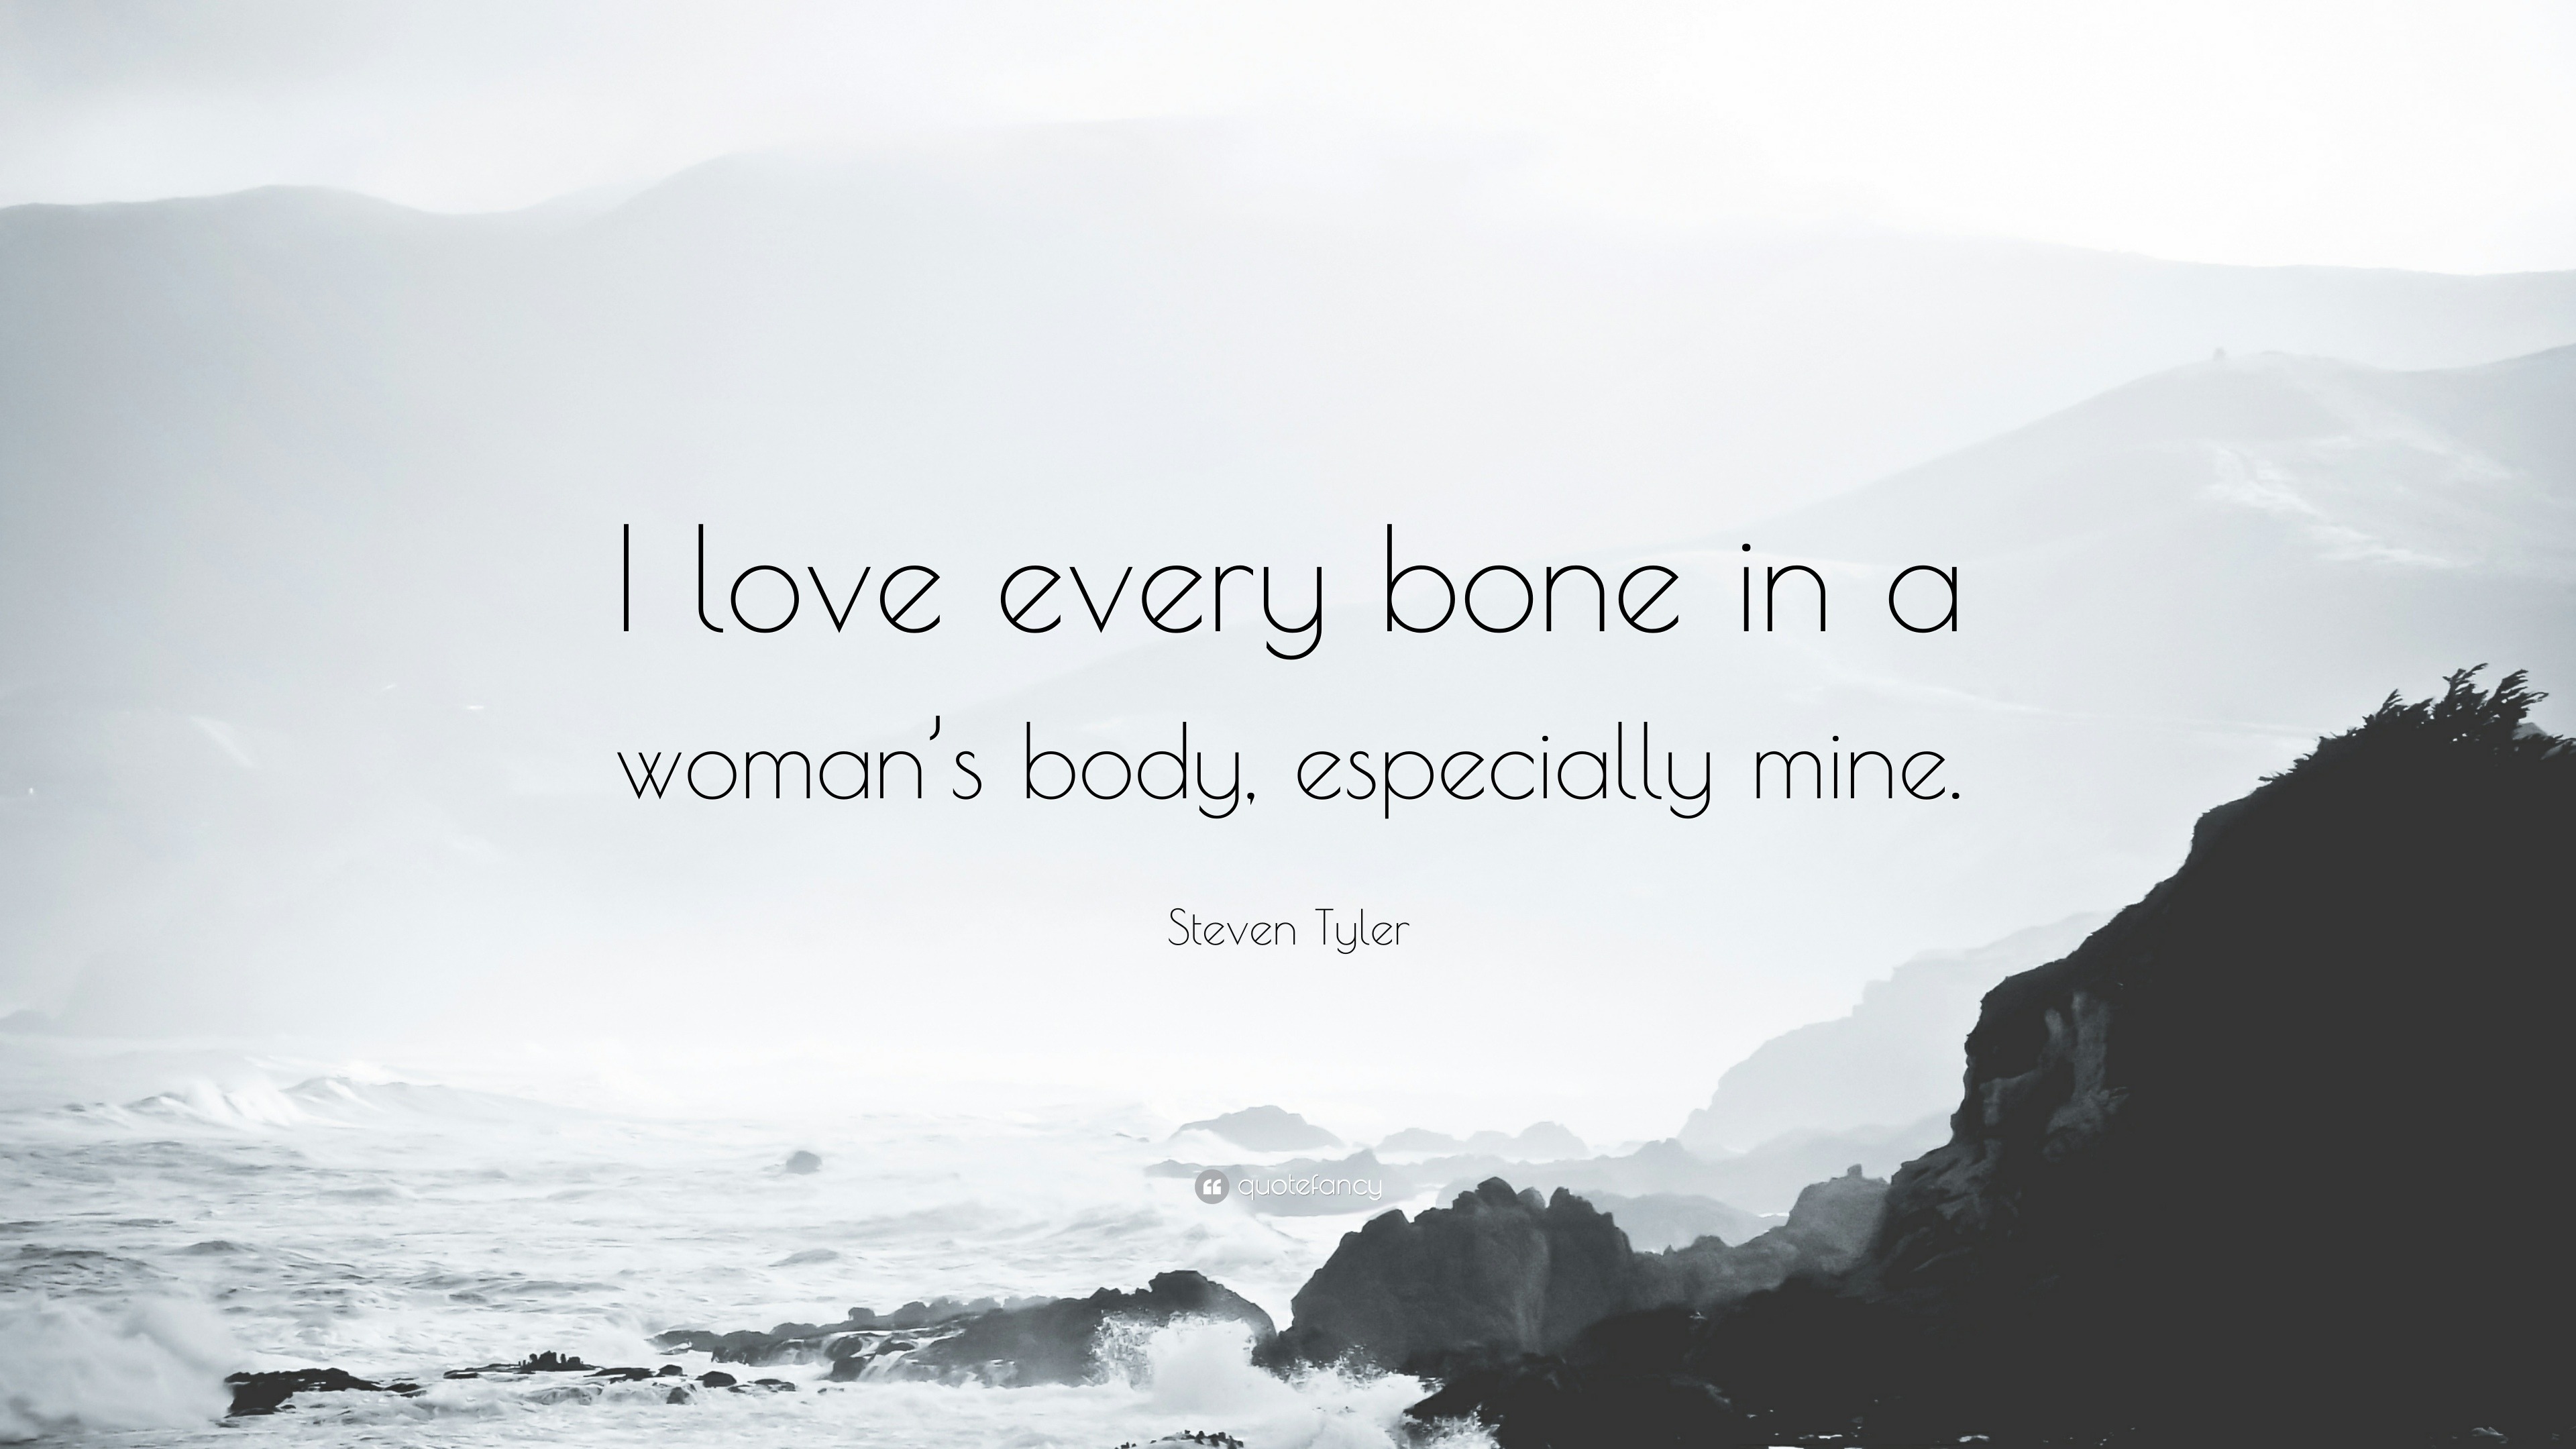 Steven Tyler quote: I love every bone in a woman's body